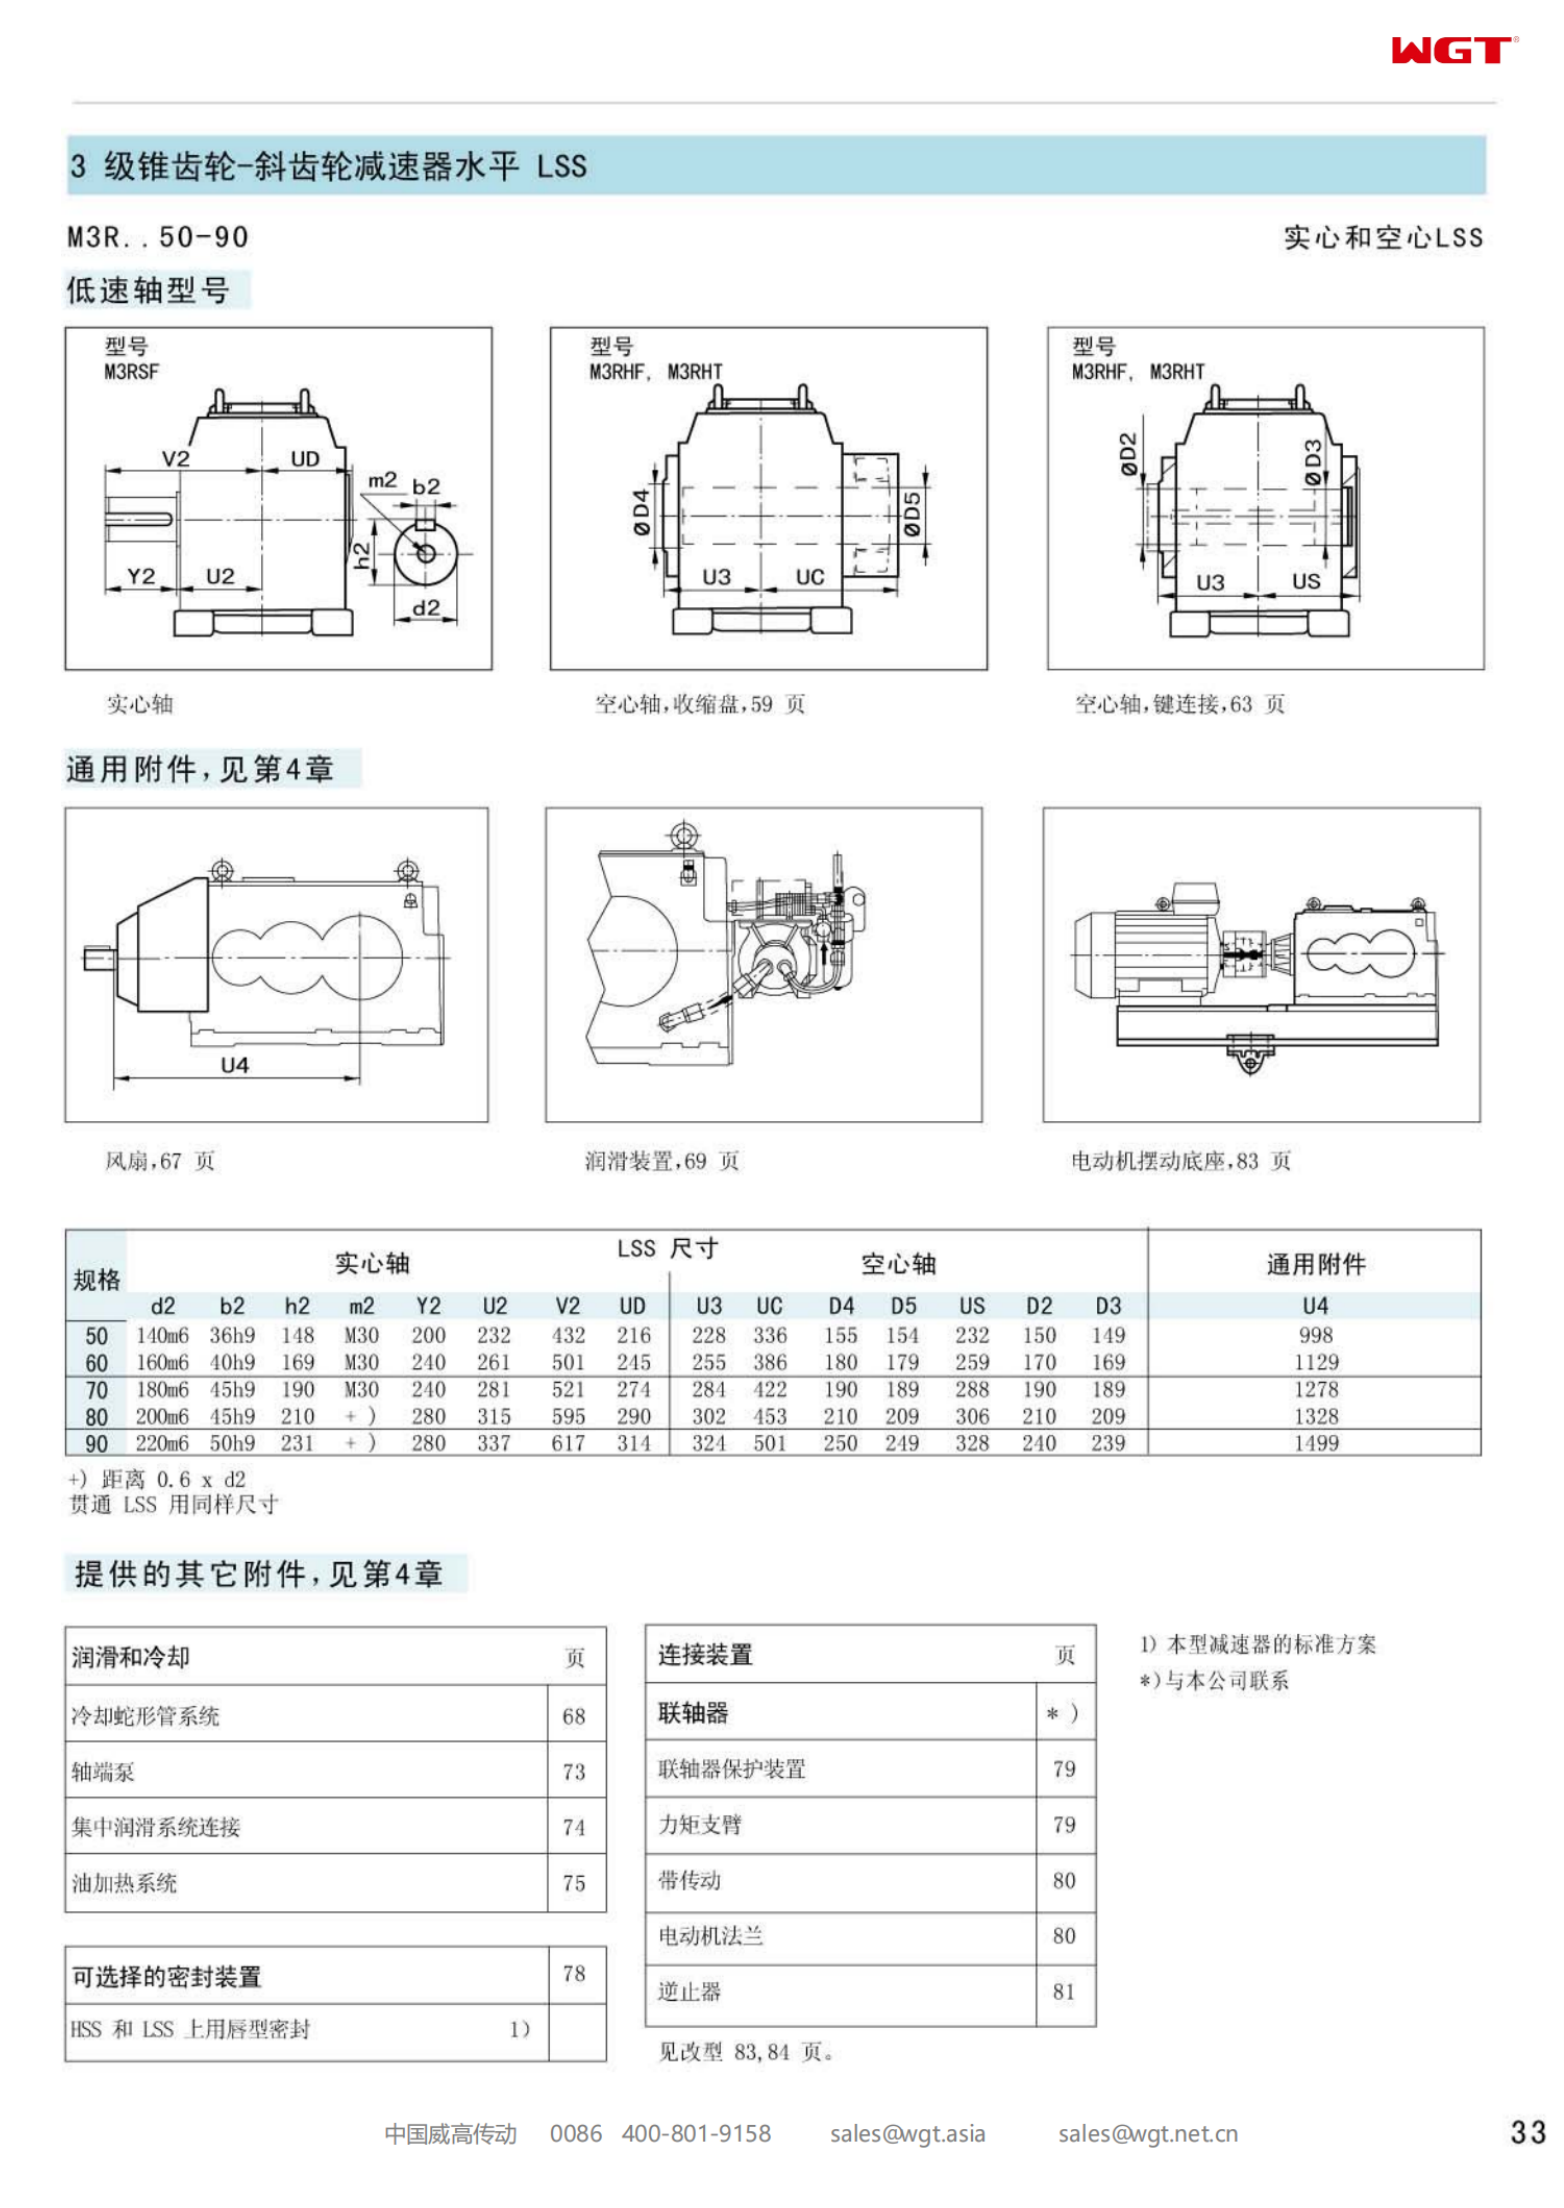 M3RSF90 Replace_SEW_M_Series Gearbox